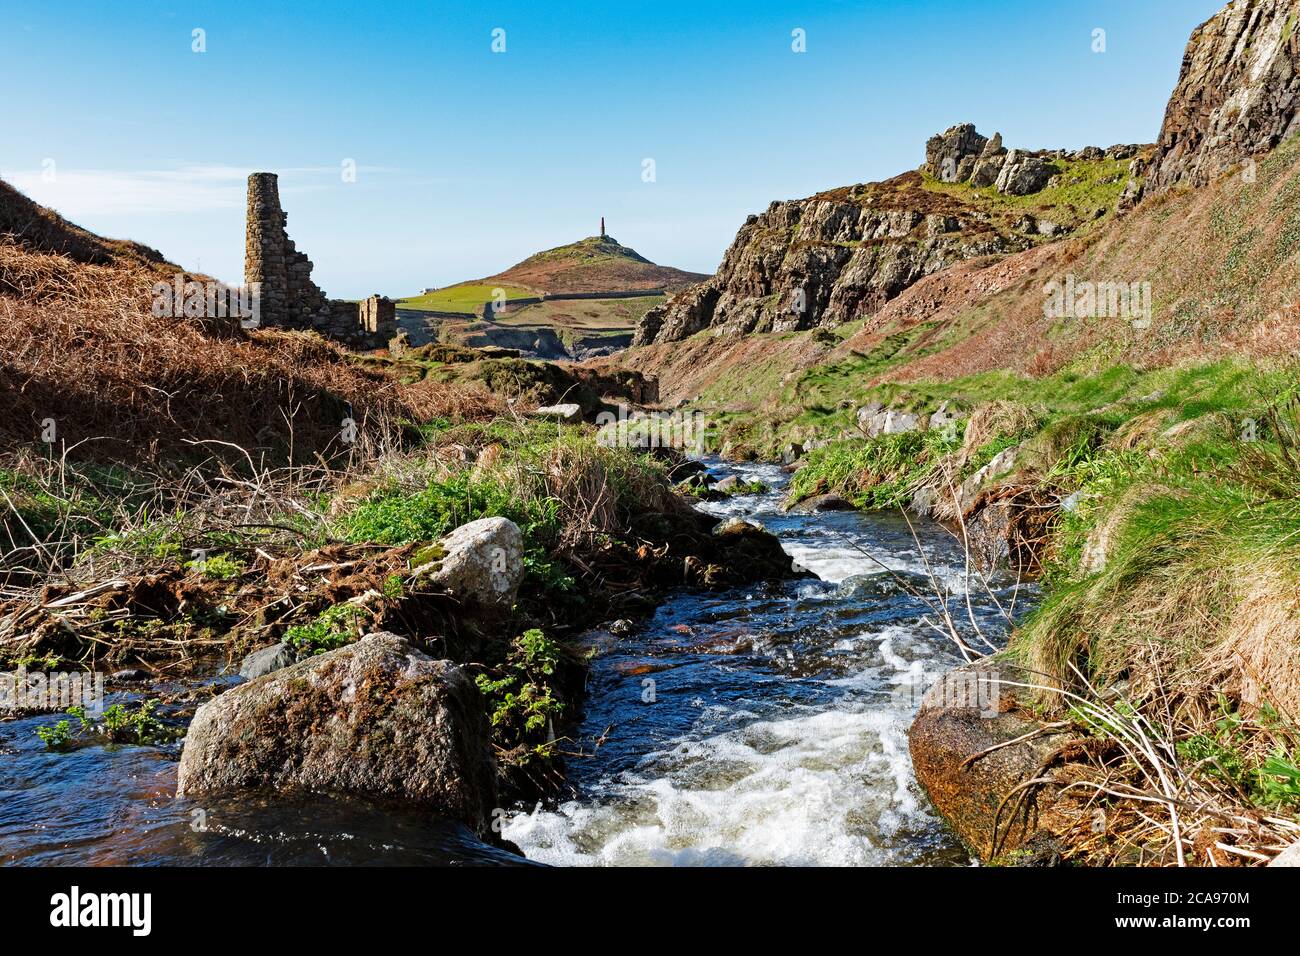 Kenidjack valley cornwall with cape cornwall in the background Stock Photo